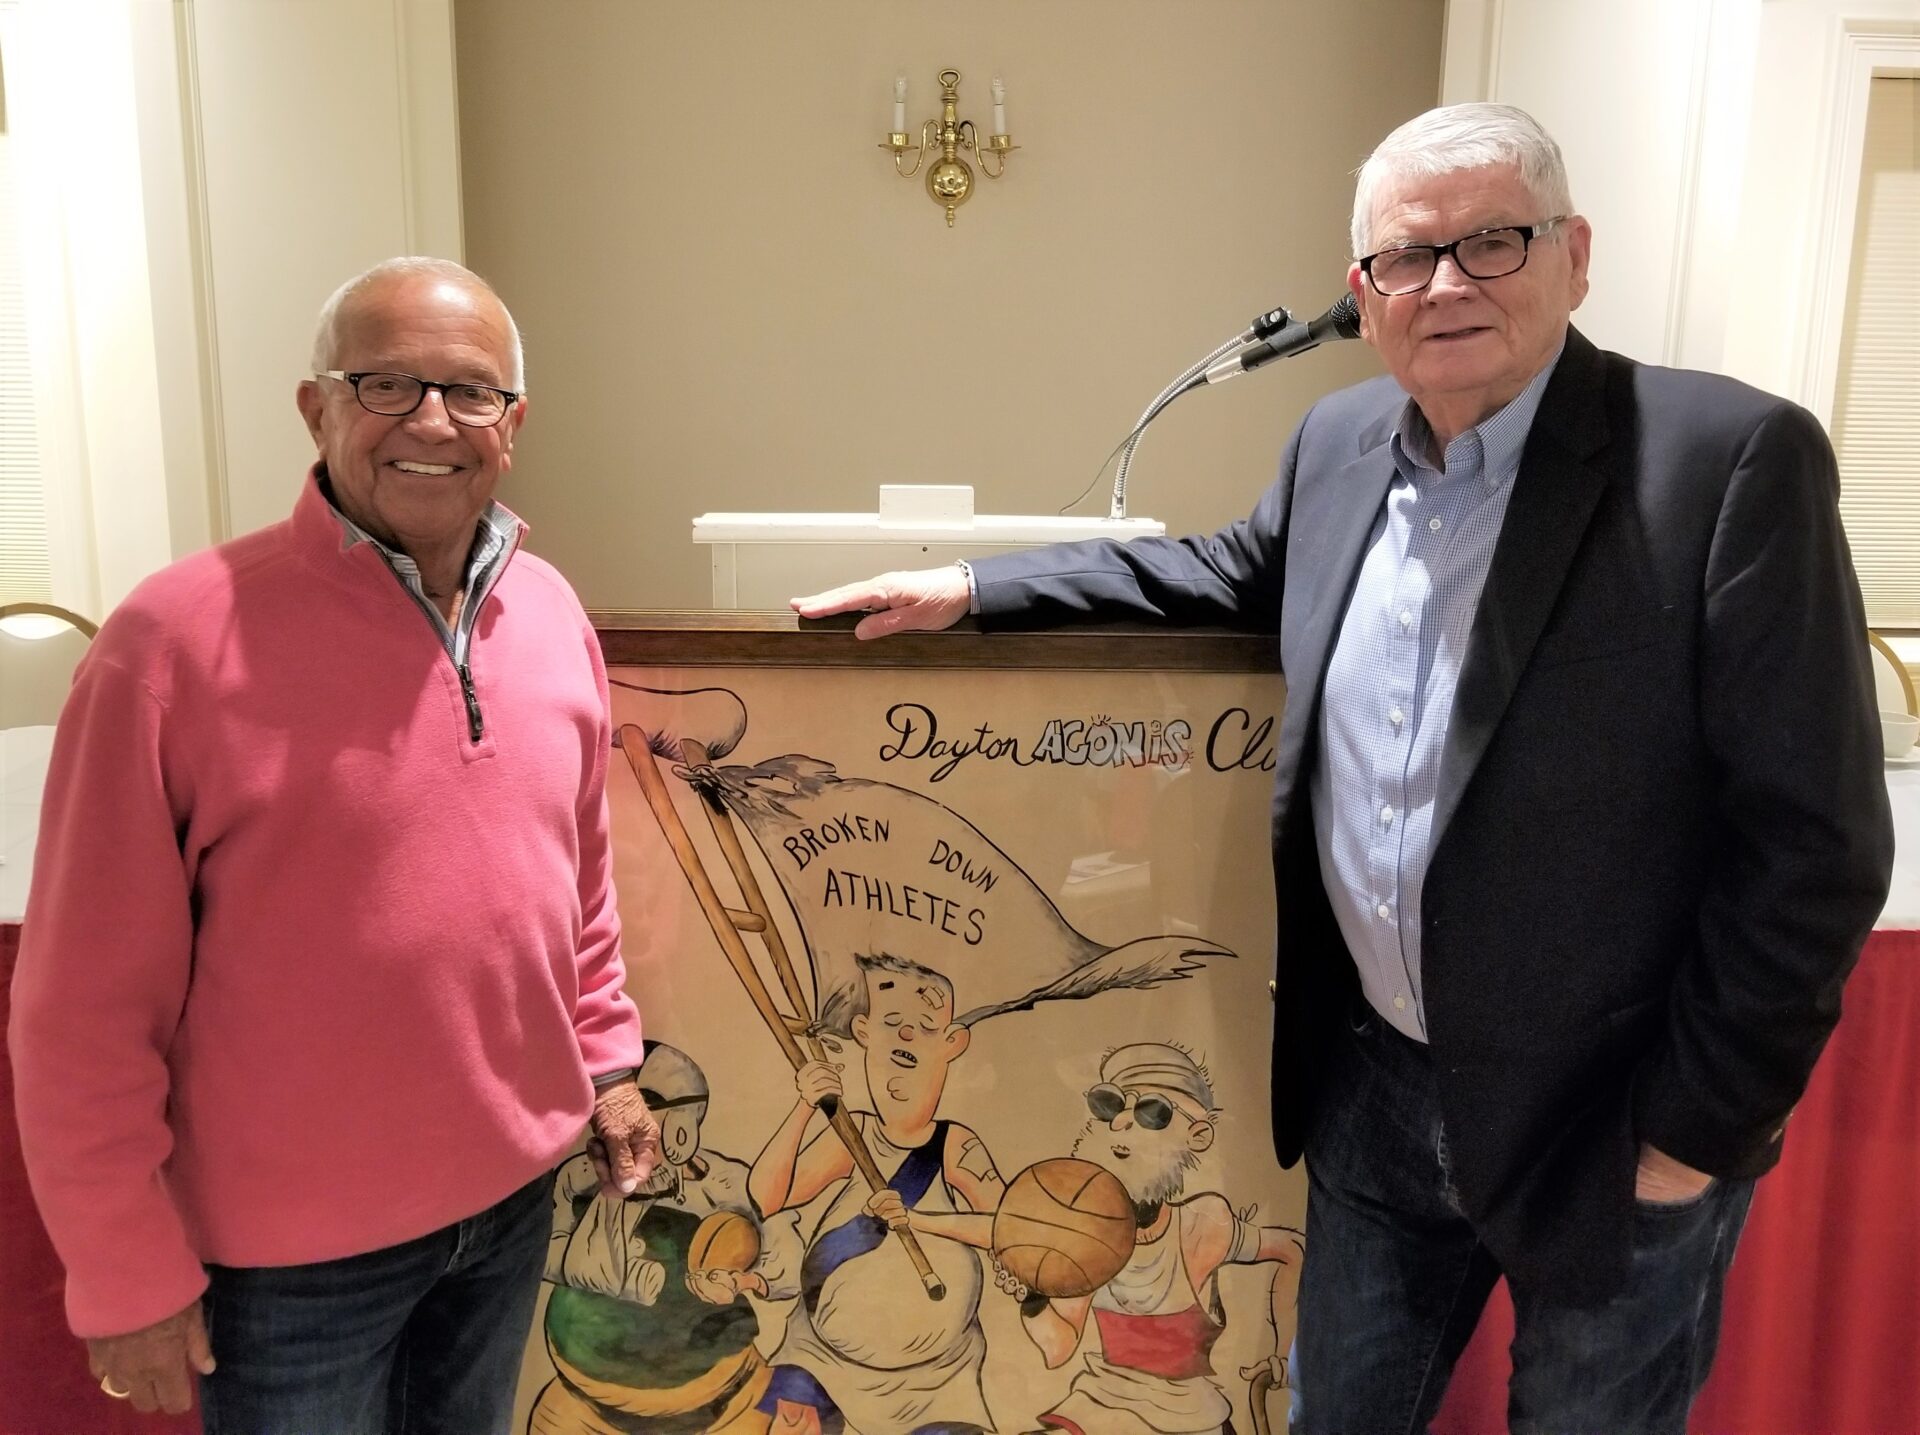 Two men standing next to a painting of cartoon characters.